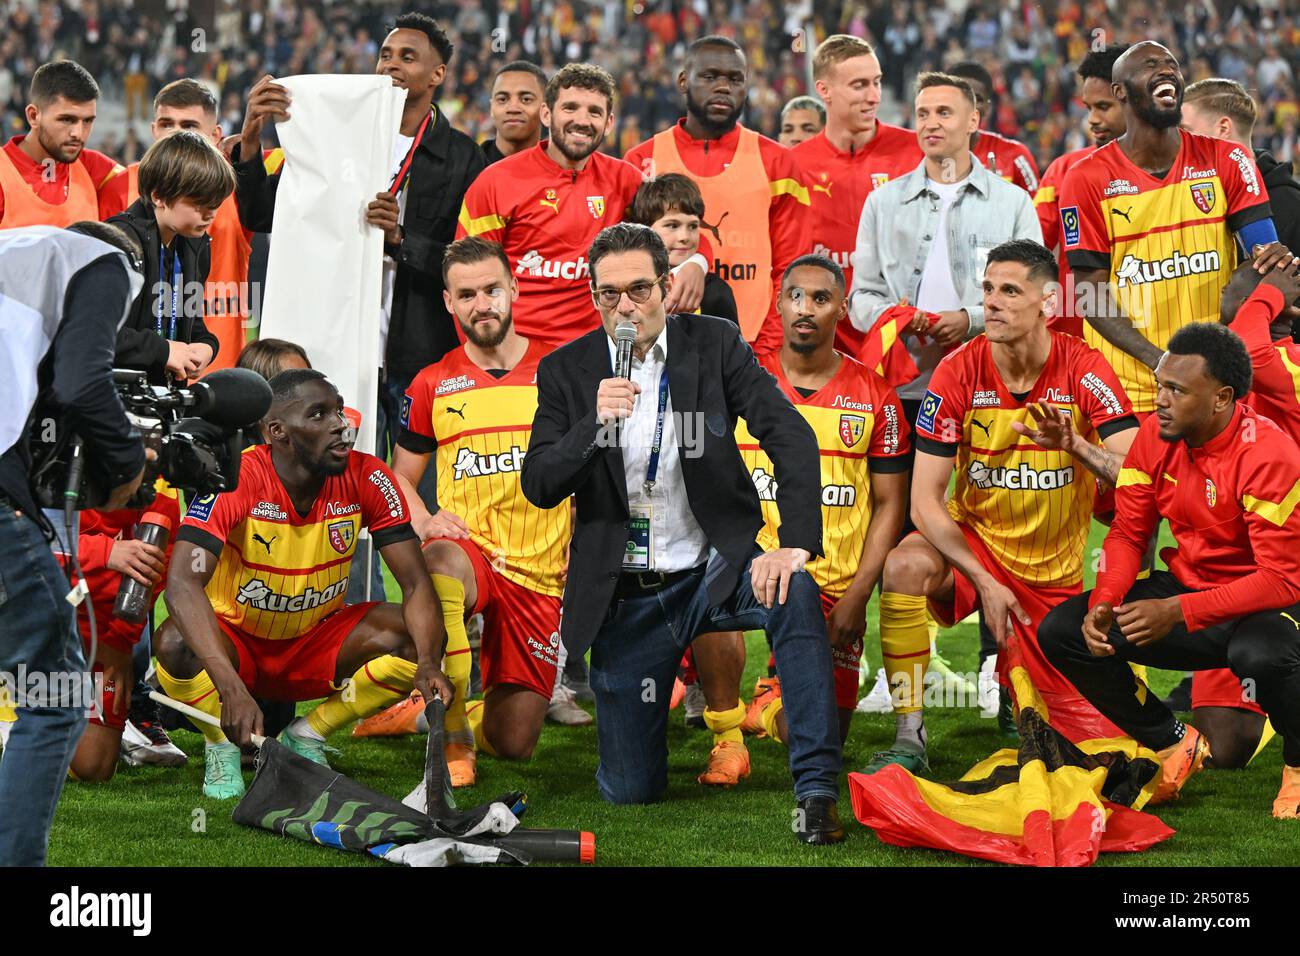 players of RC Lens and their president Joseph Oughourlian pictured  celebrating after winning and qualifying for the Champions League after a  soccer game between t Racing Club de Lens and AC Ajaccio